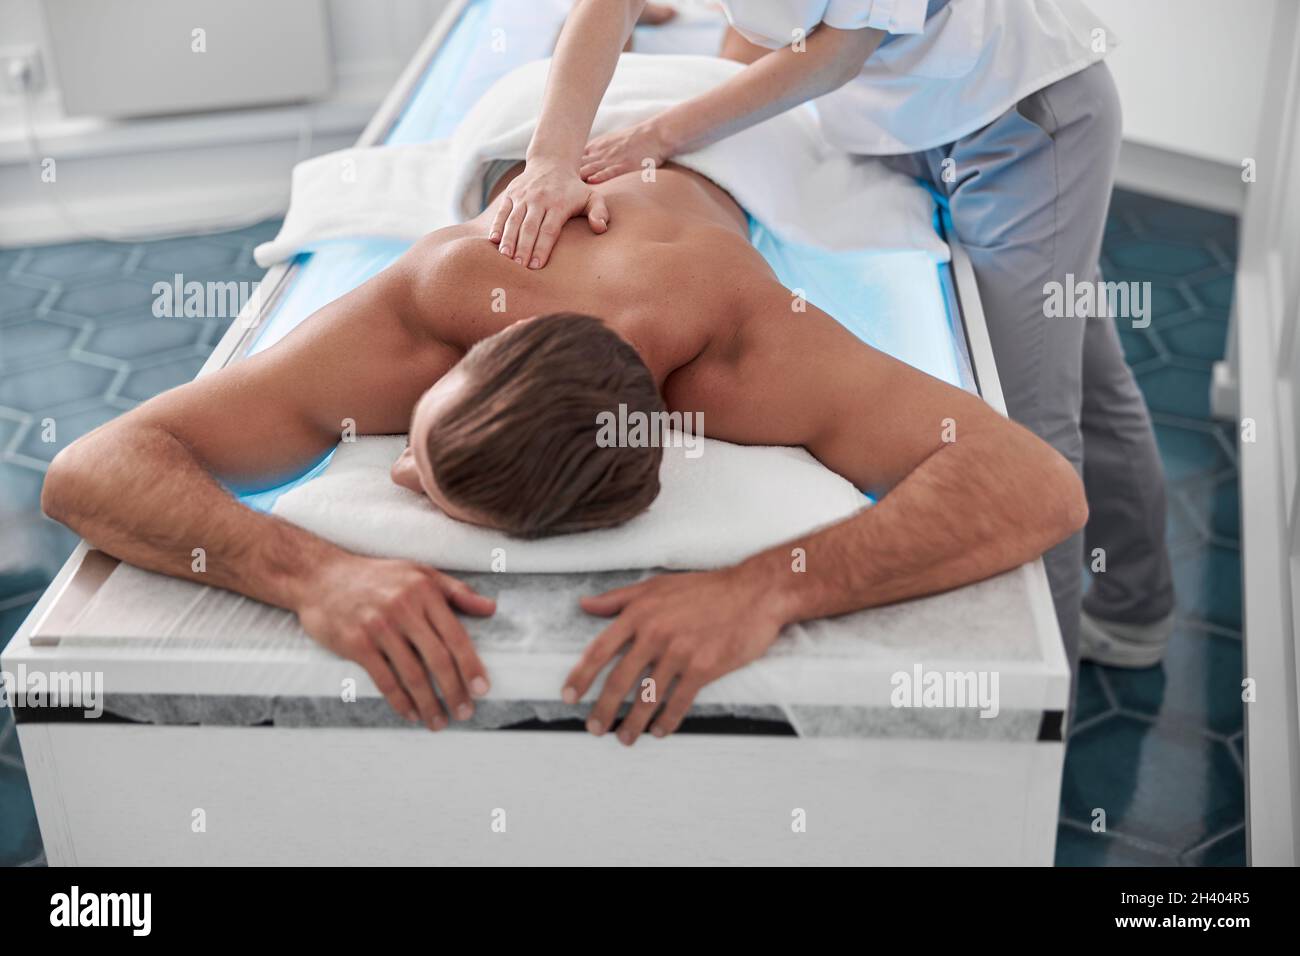 Man lies on comfortable couch while chiropractic does back massage to him in hospital Stock Photo